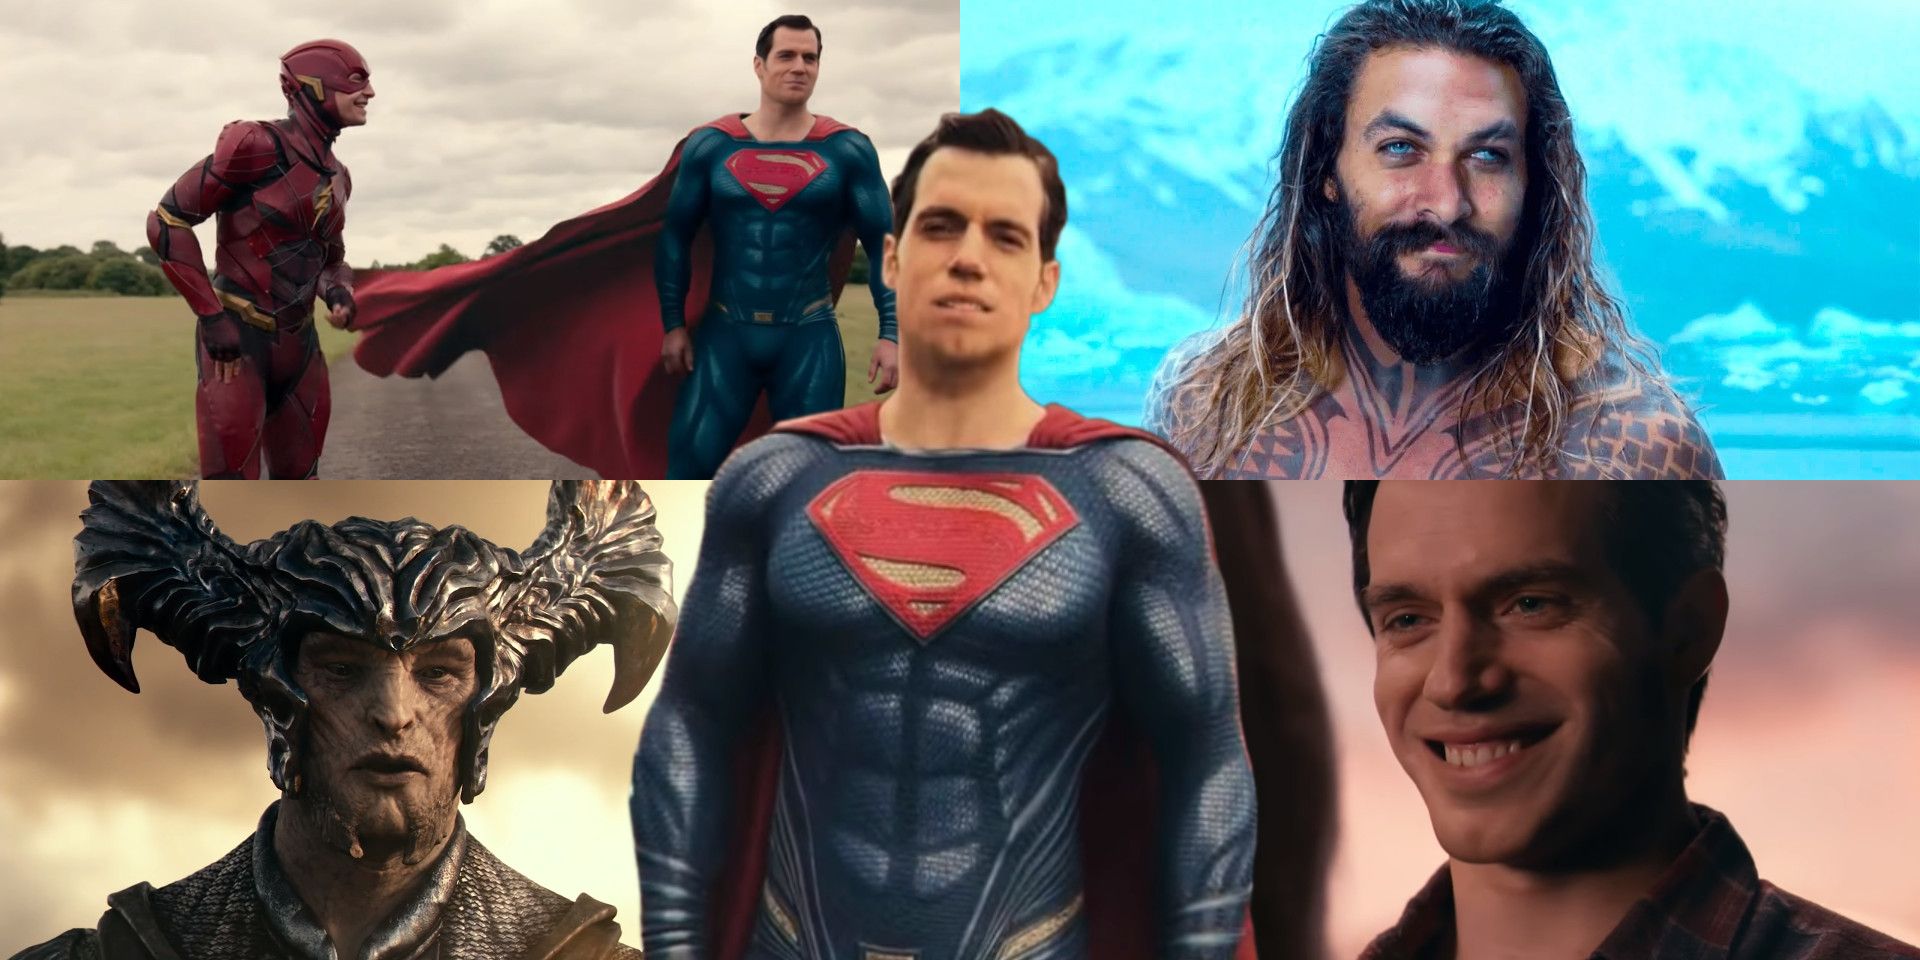 Why Justice League's CGI is So Bad